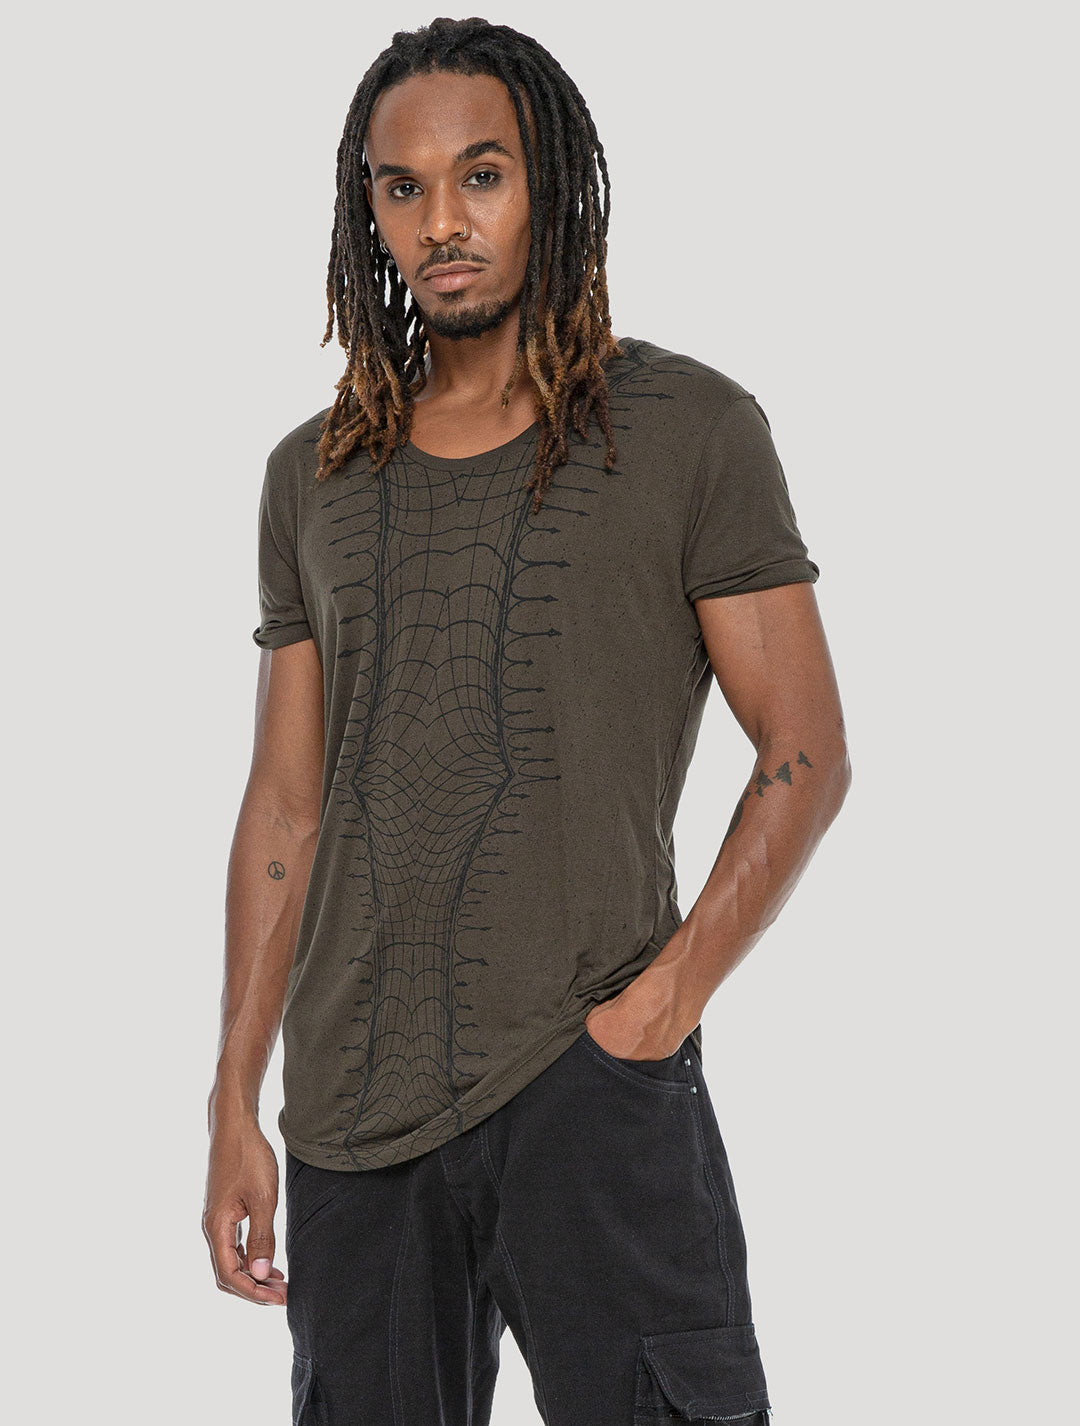 Olive green 'Vortex' 100% Bamboo Printed T-shirt by Psylo Fashion